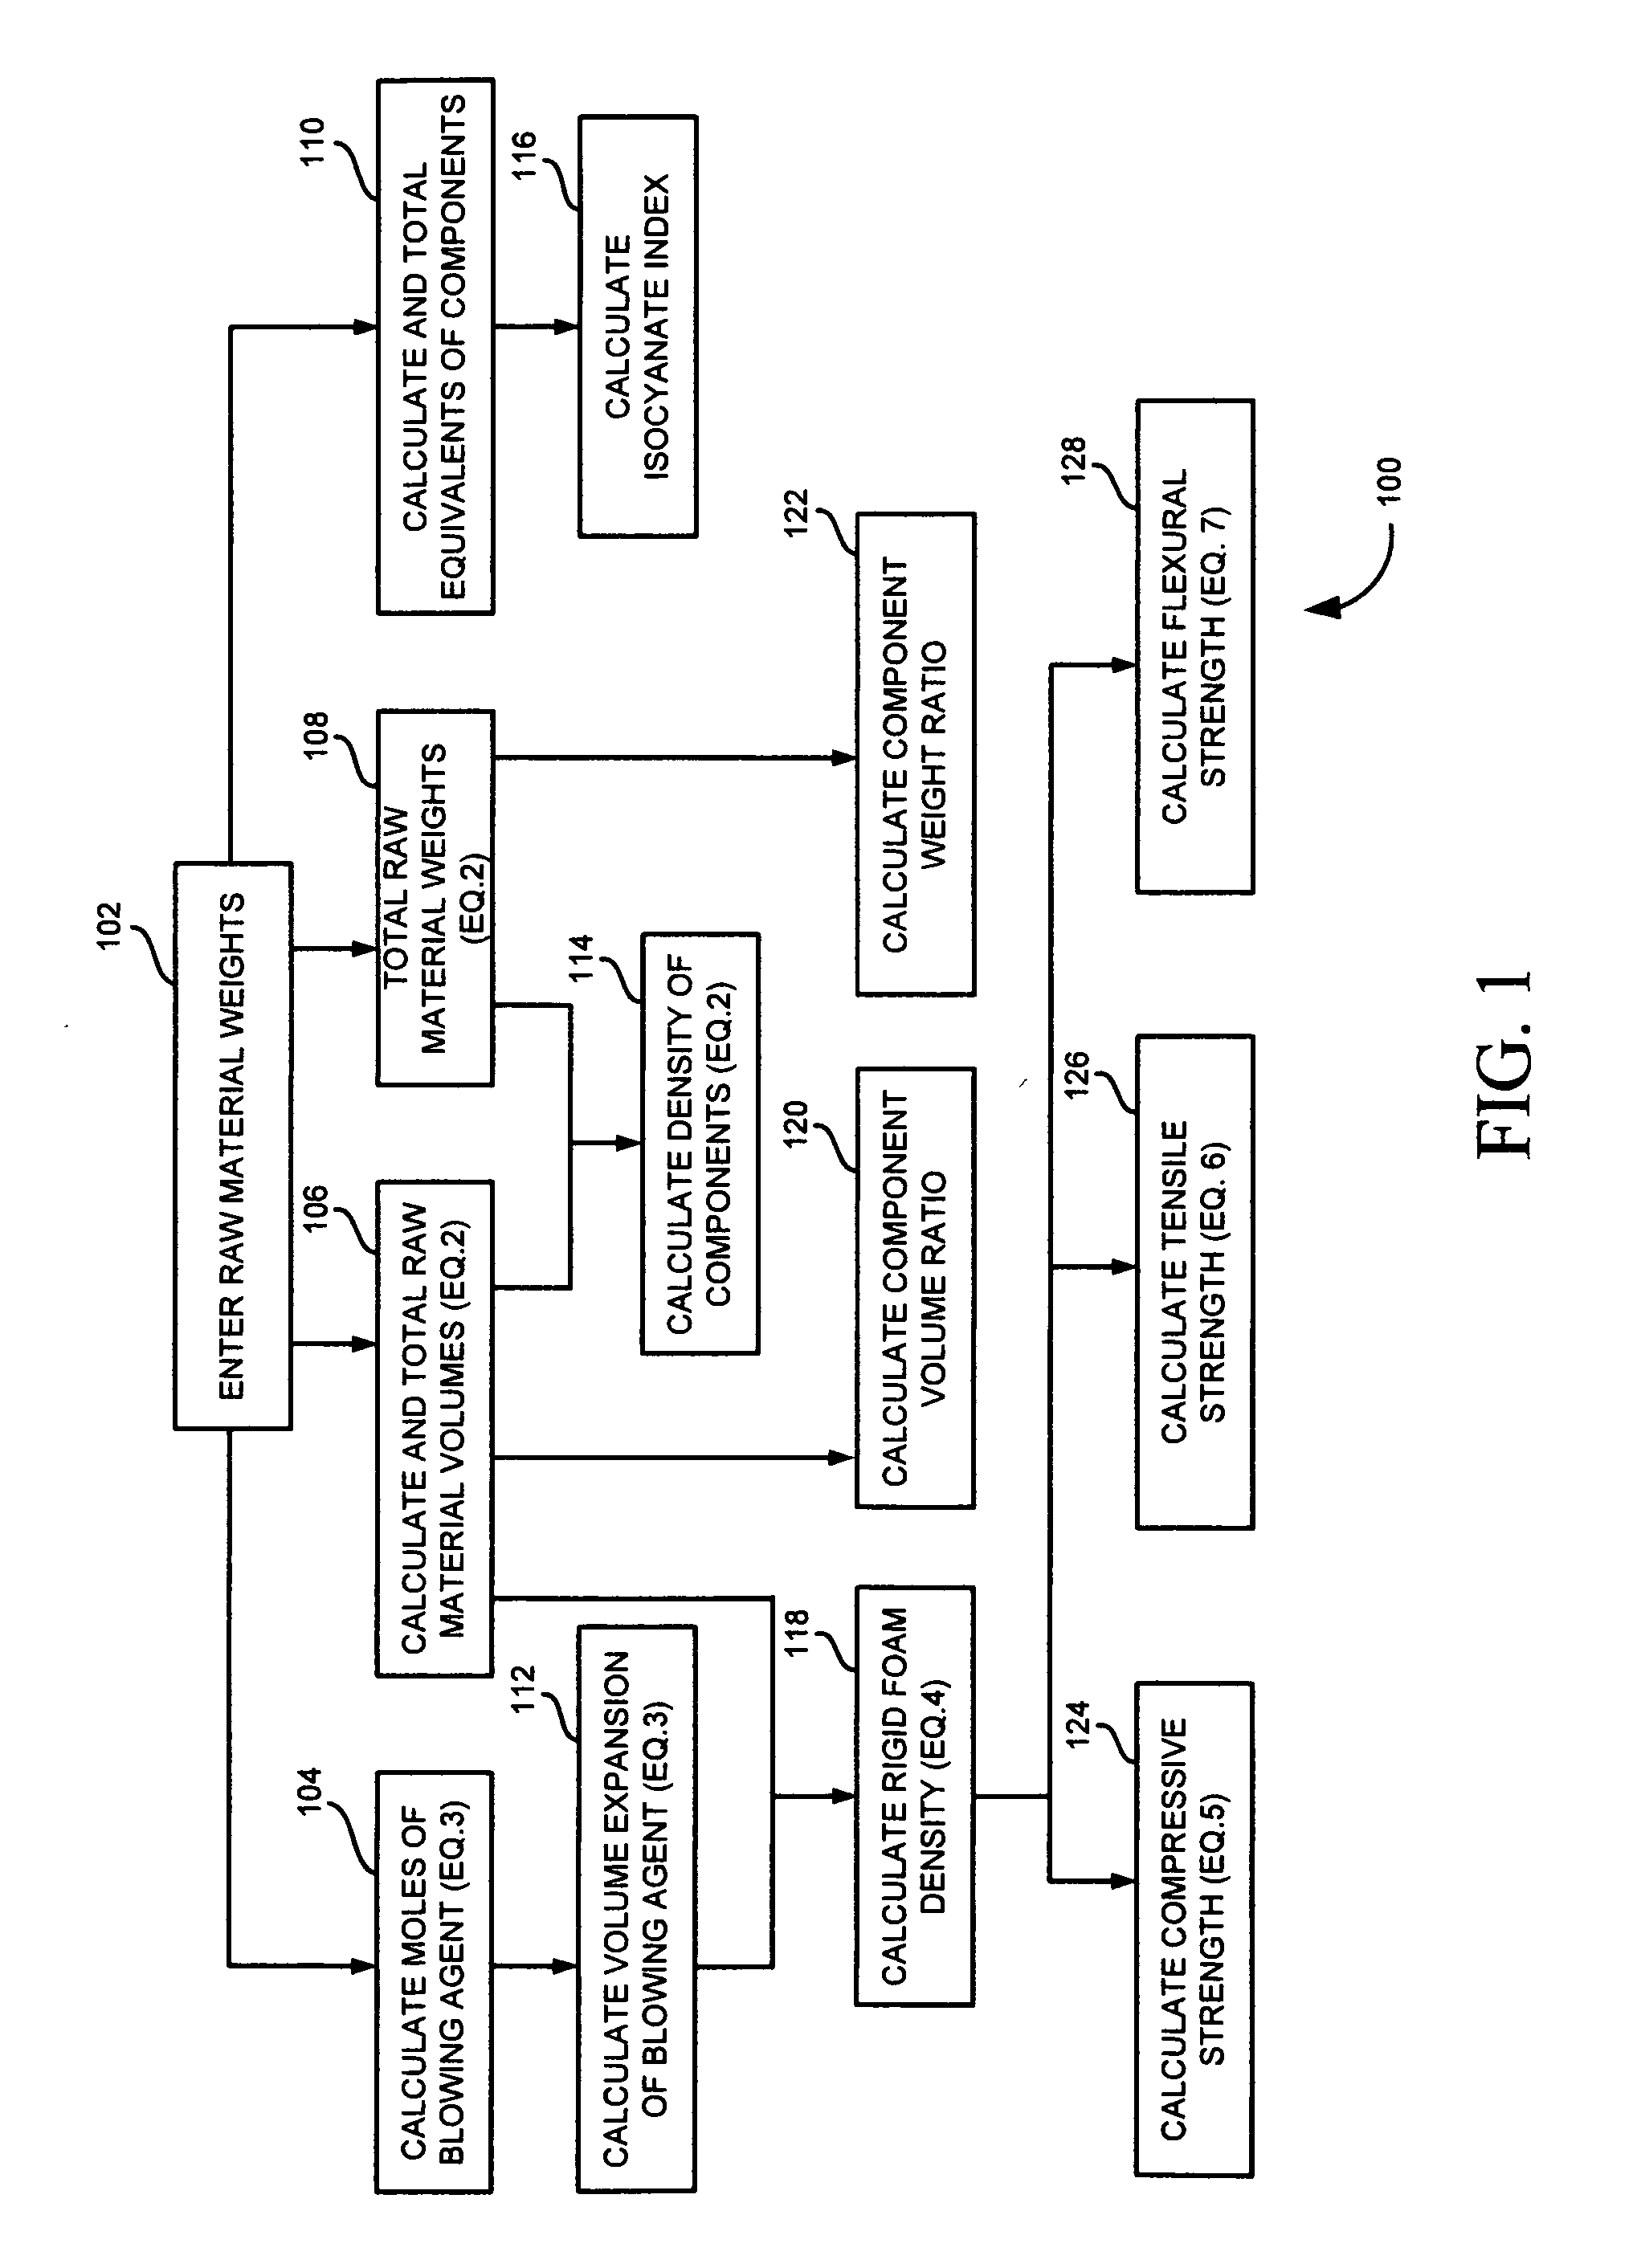 Method of predicting the physical properties of polyurethane materials